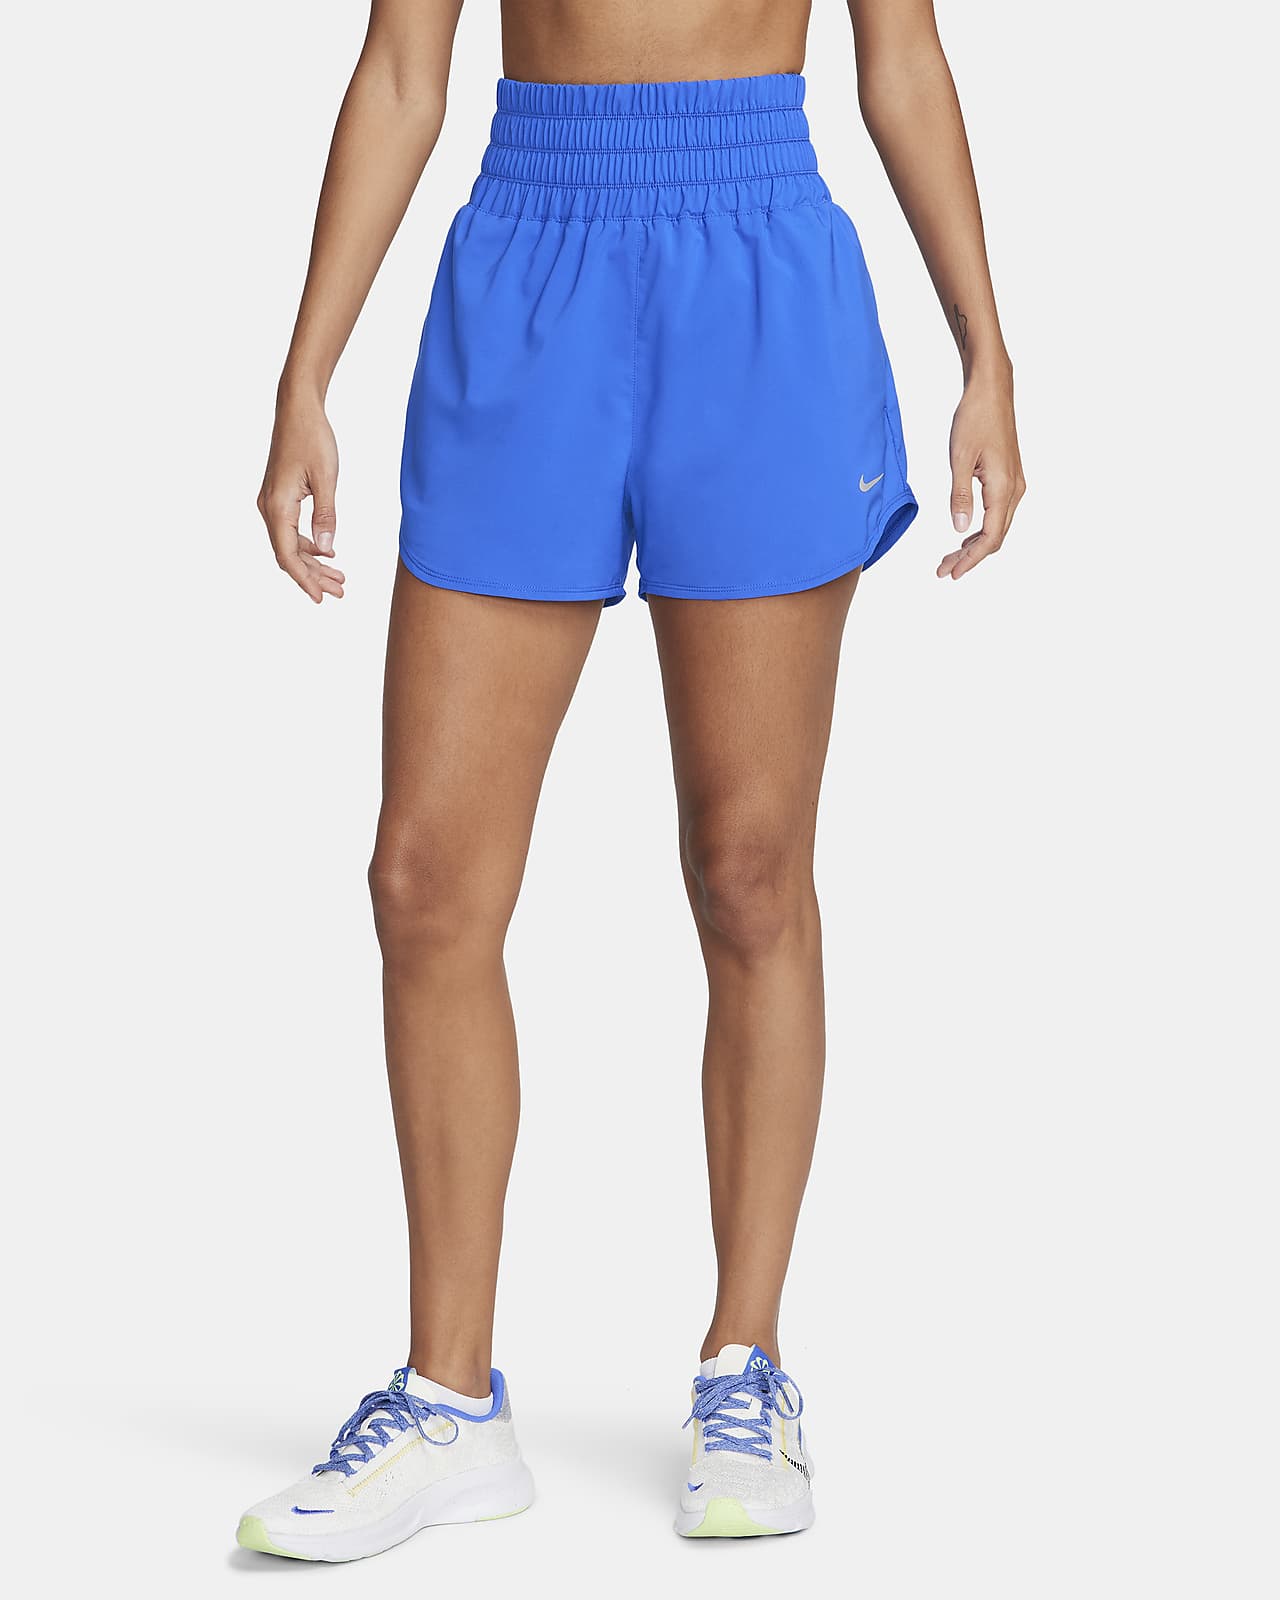 Nike One Women\'s Dri-FIT Ultra High-Waisted Shorts. Brief-Lined 3